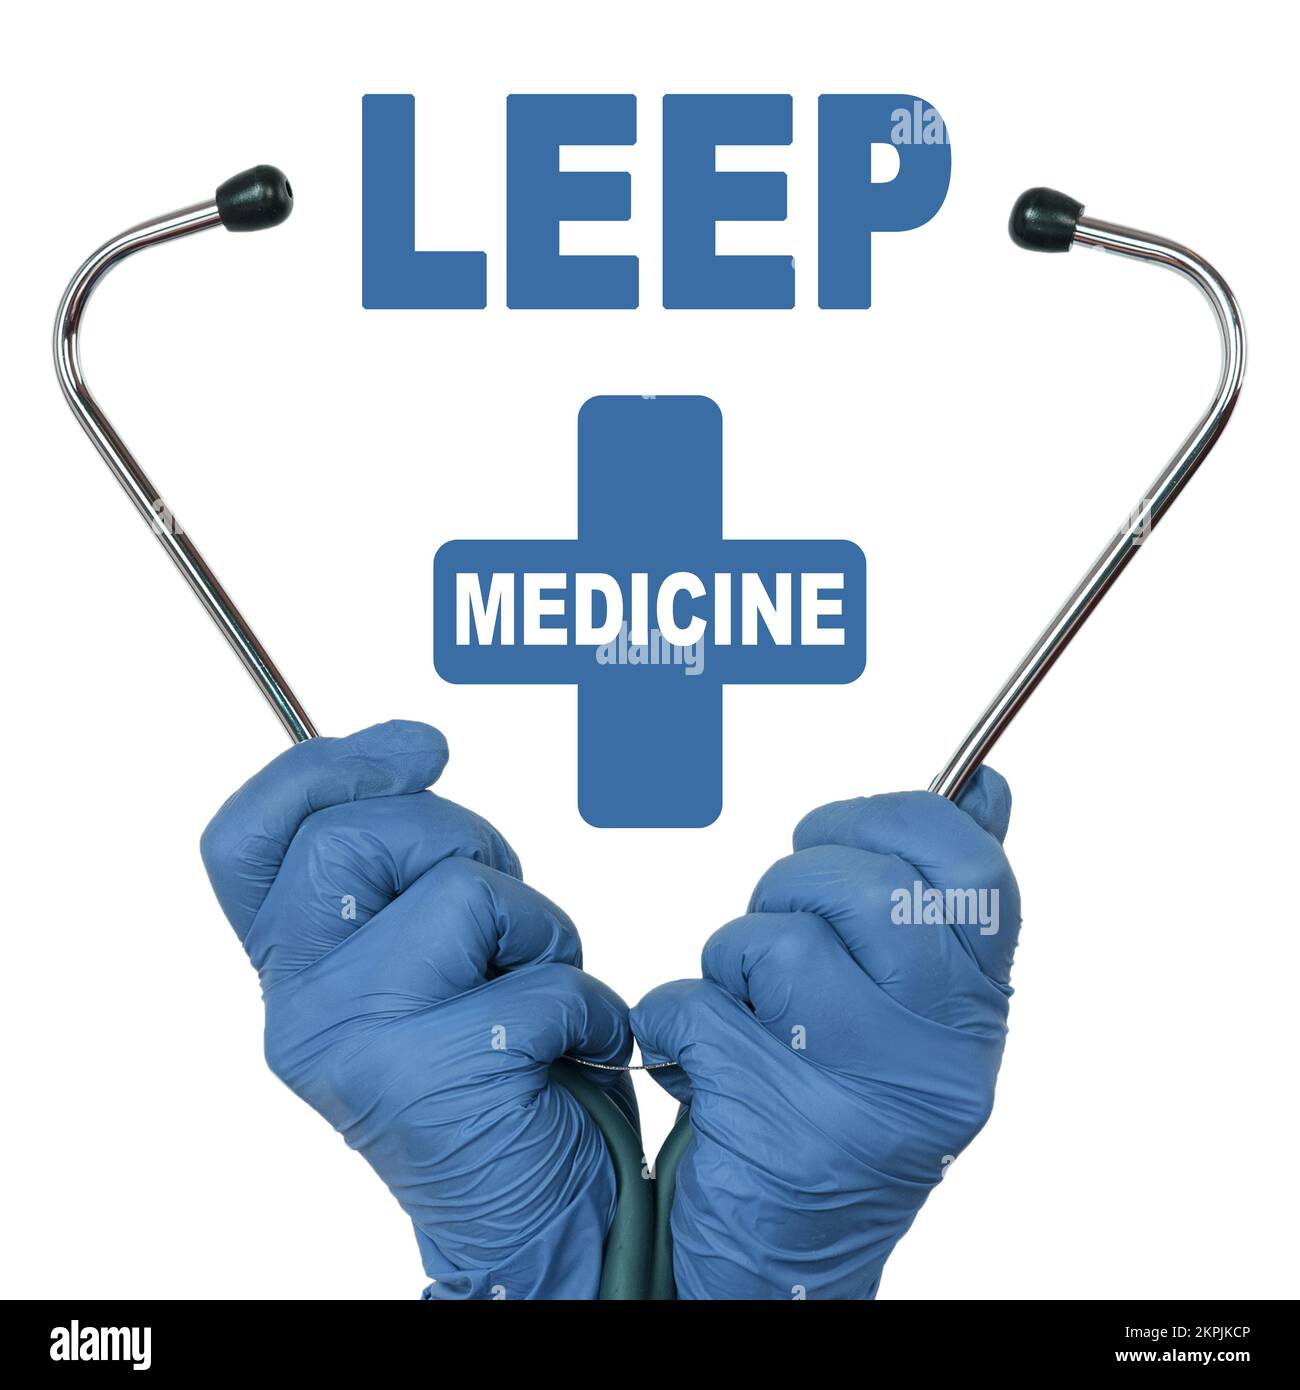 Health care and medicine concept. The doctor is holding a stethoscope, in the middle there is a text - LEEP Stock Photo